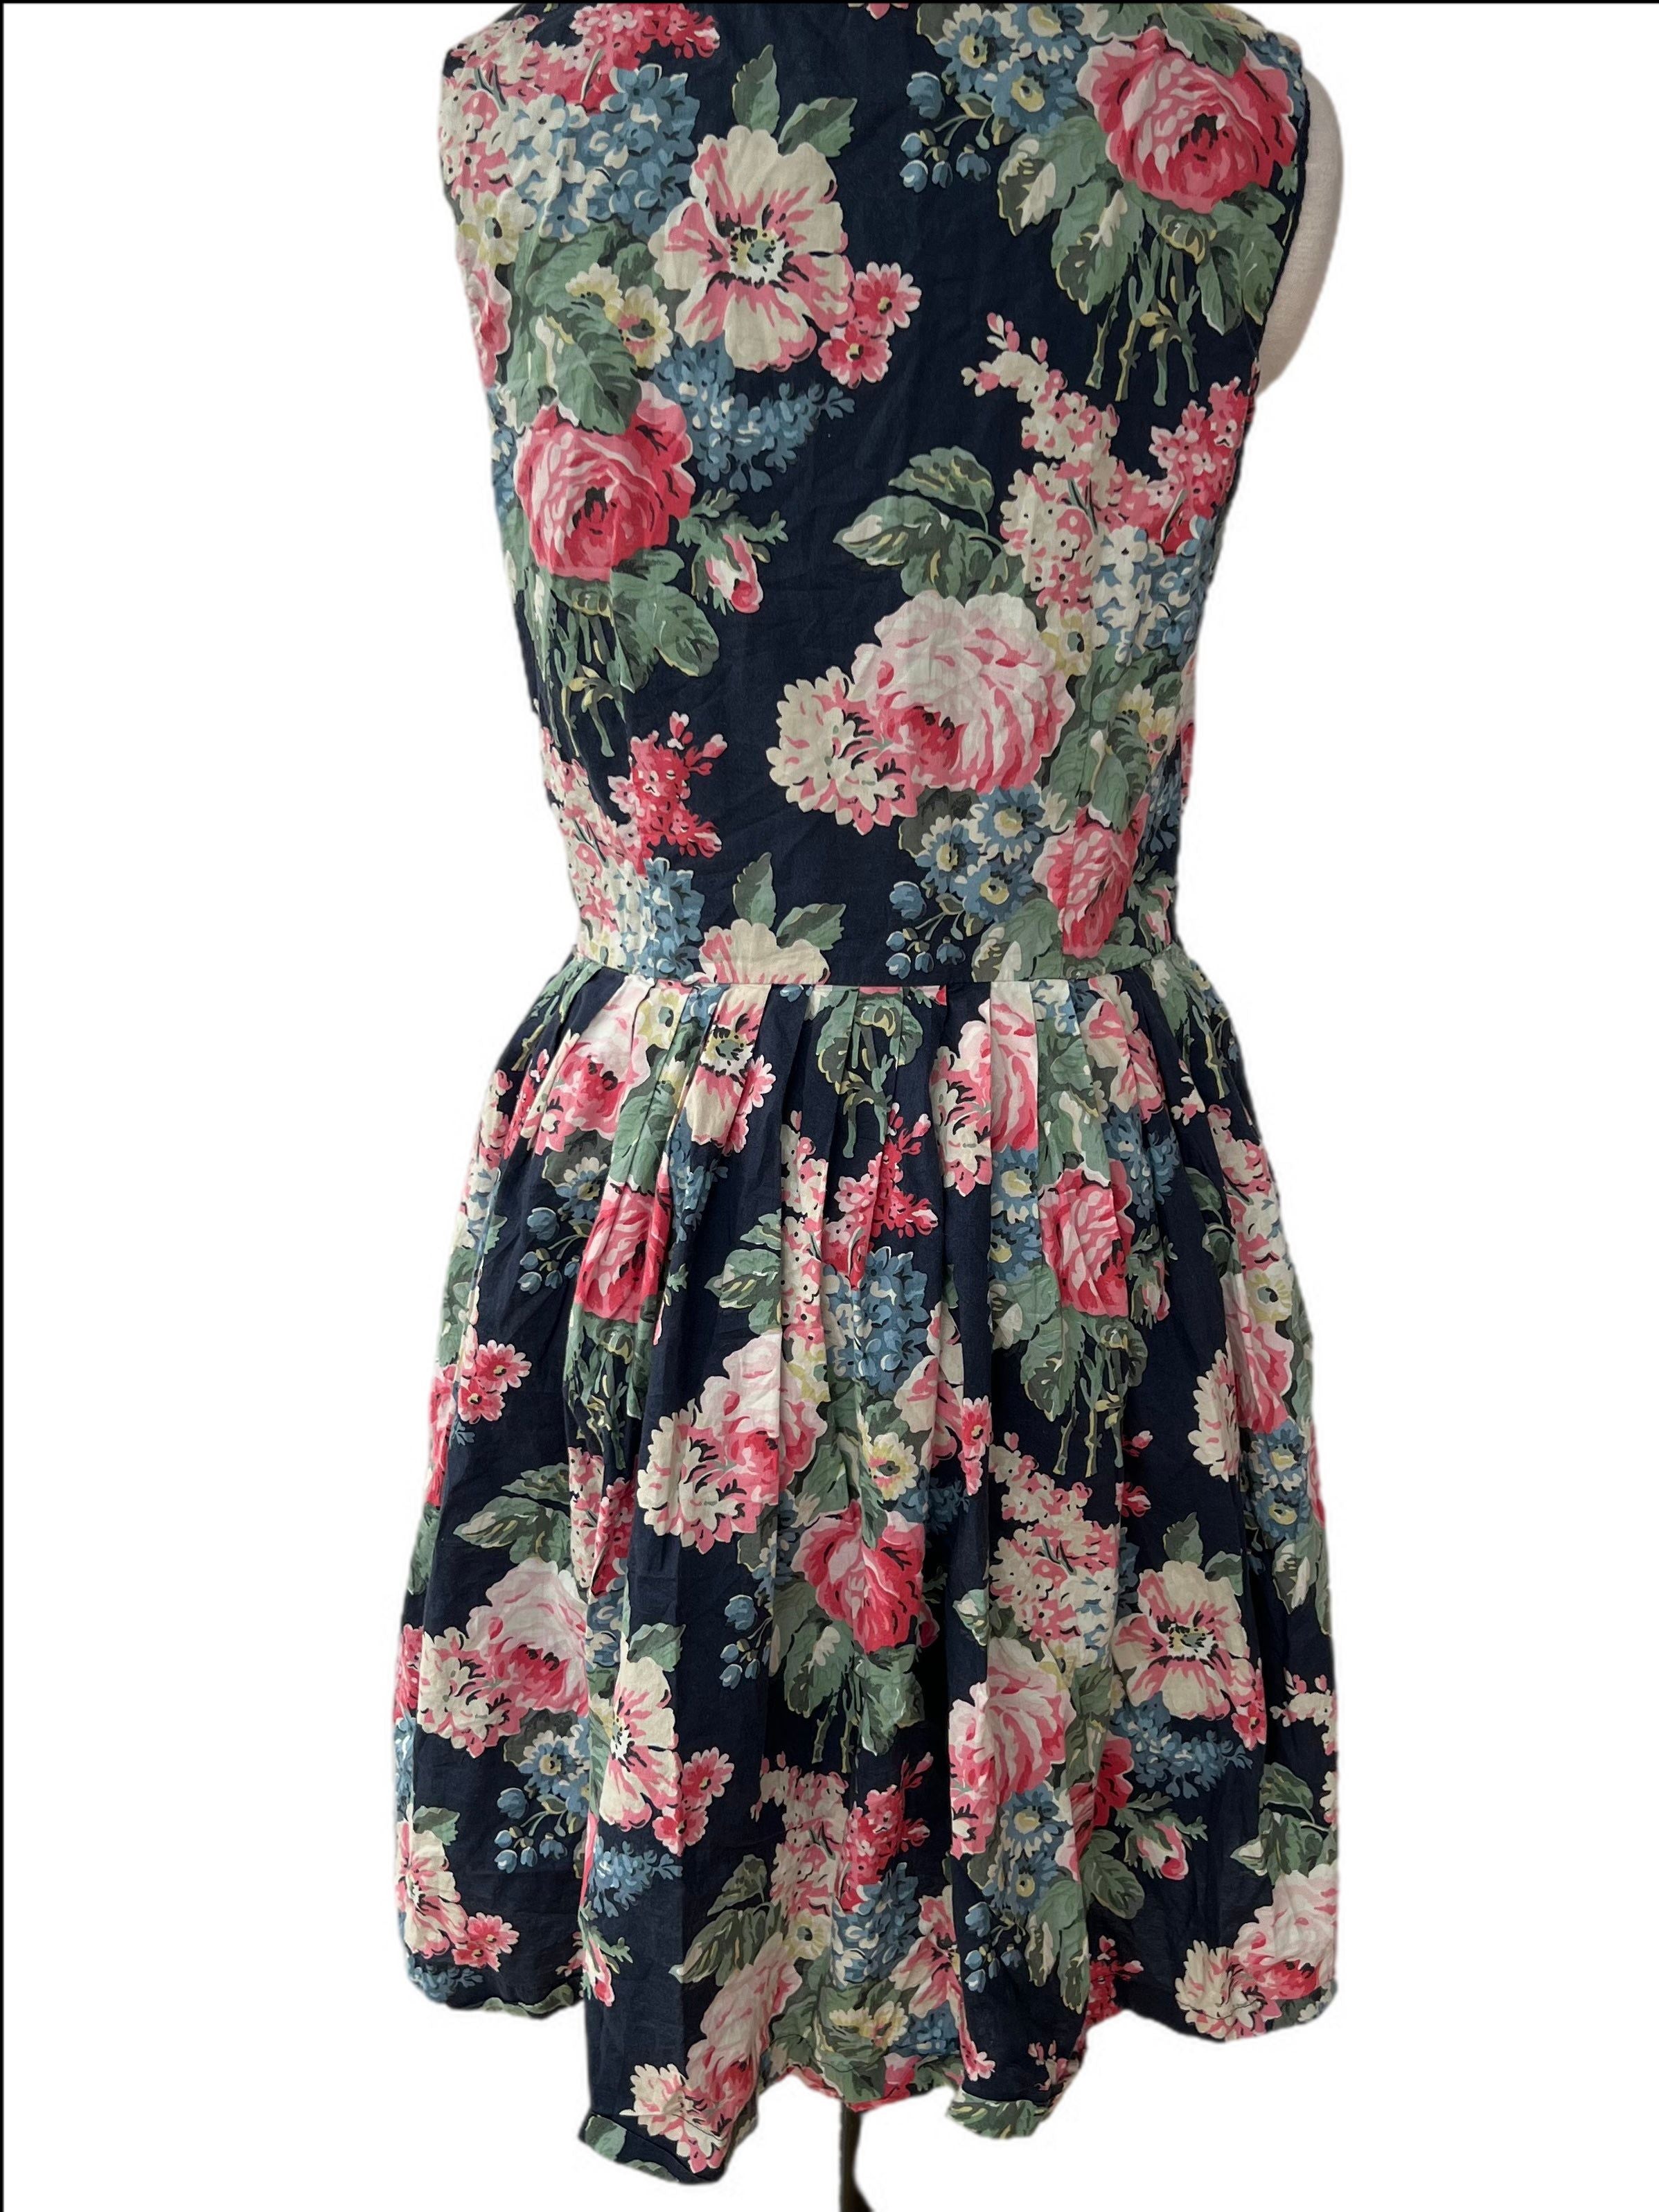 Rare Bloomsbury Bouquet Vintage 1950s Style English Rose Dress, with Pockets